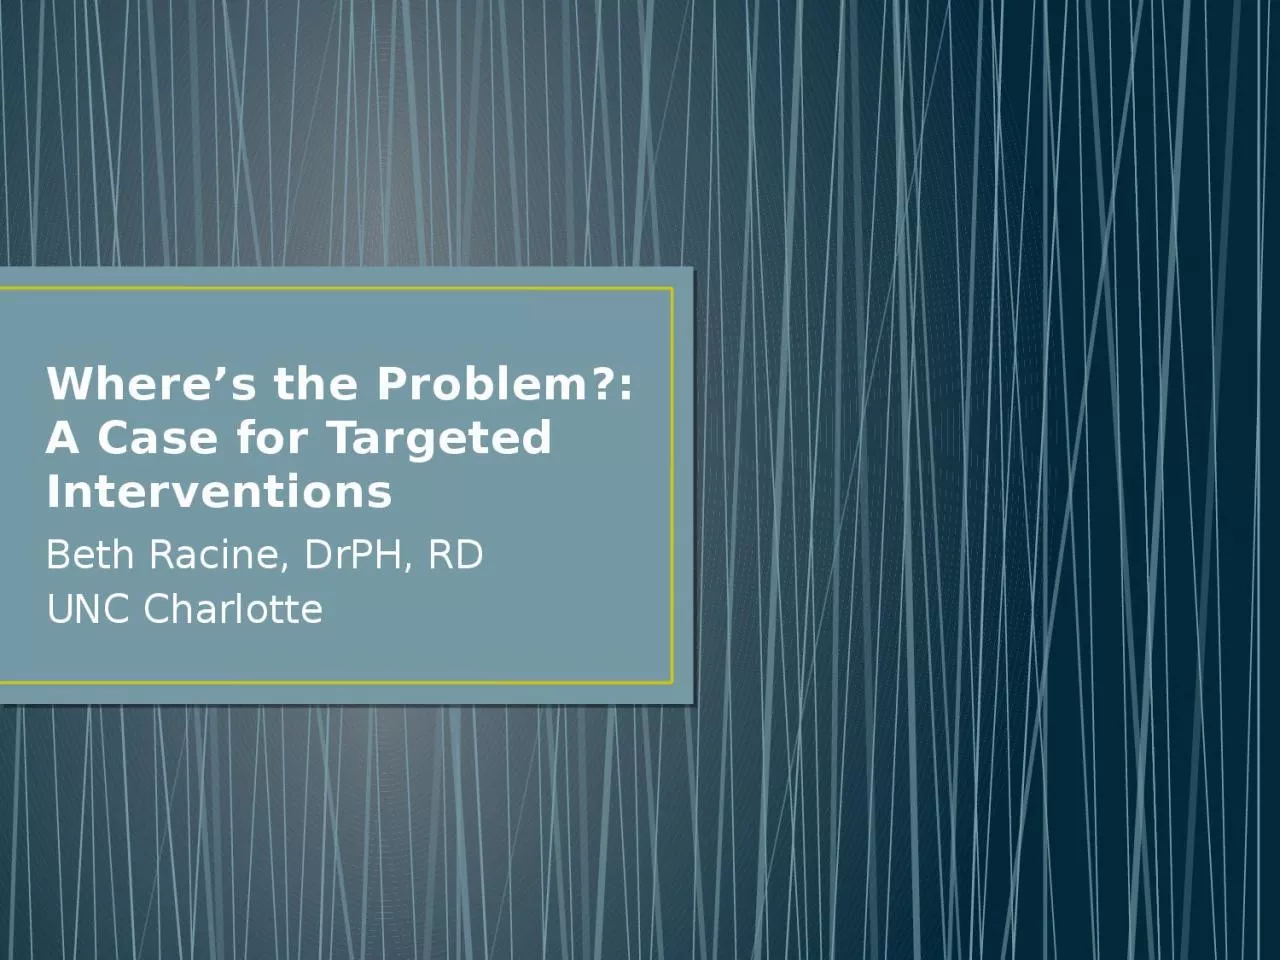 Where’s the Problem?: A Case for Targeted Interventions